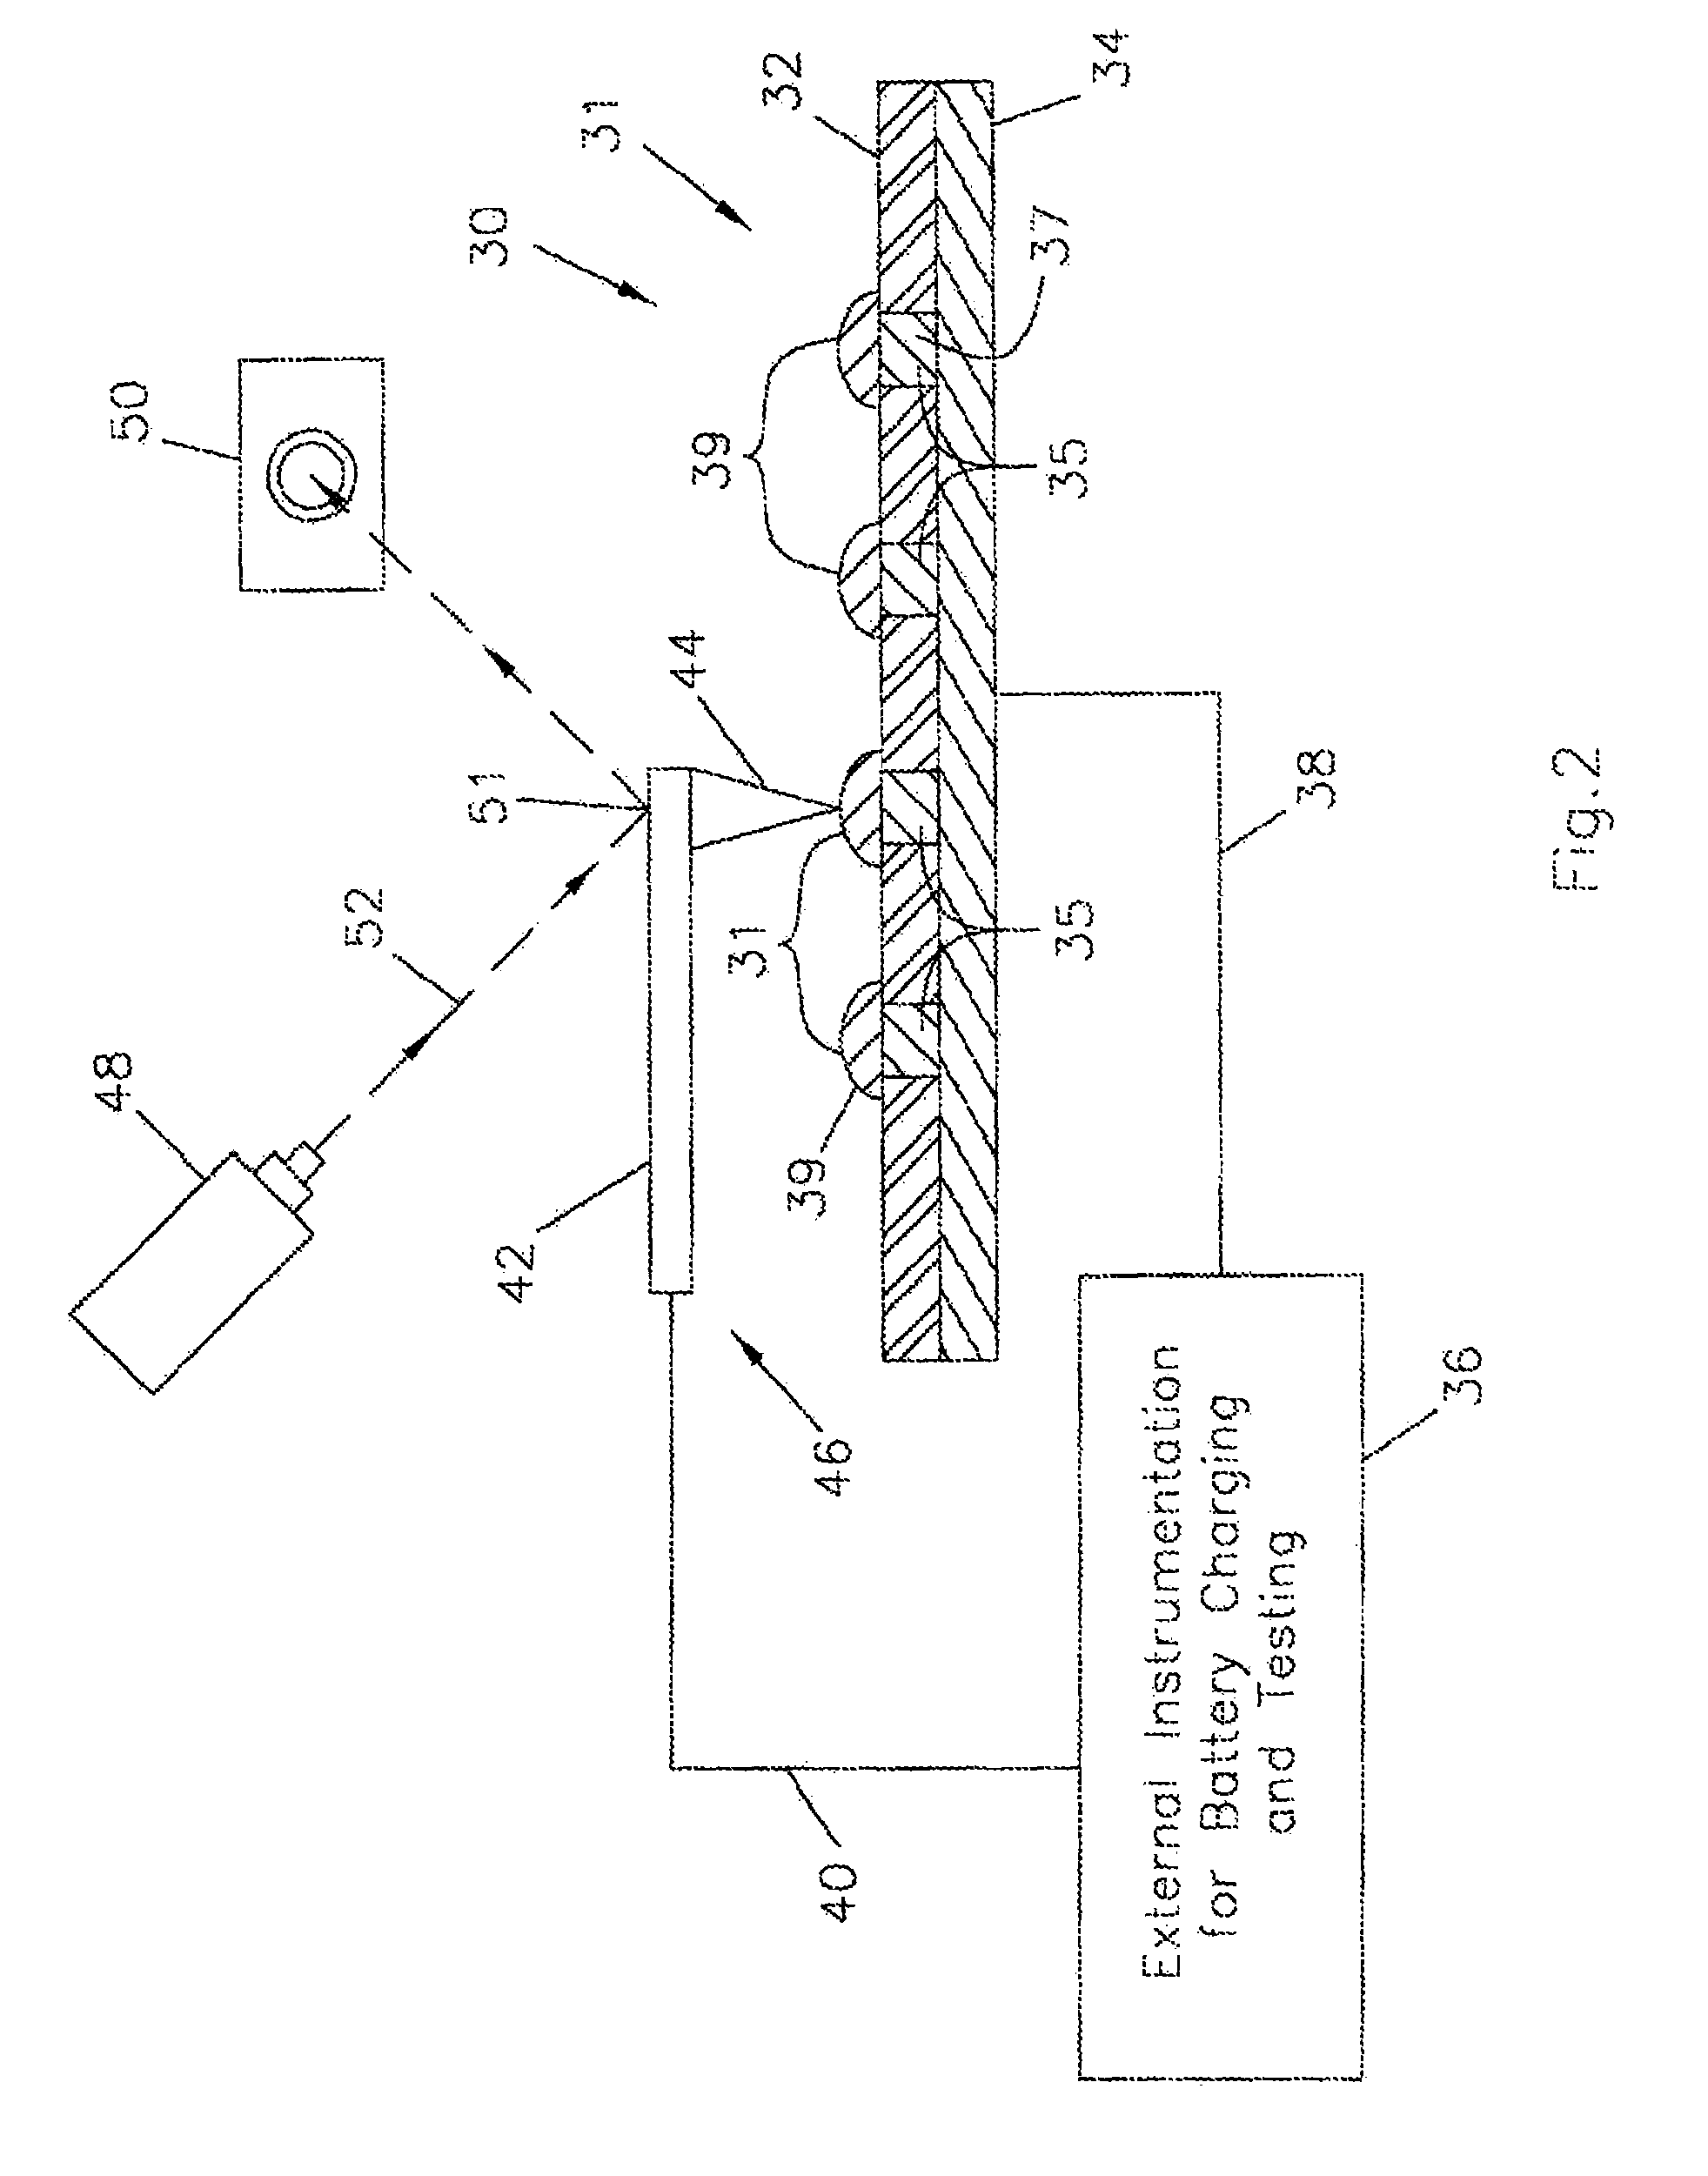 Electronic crossbar system for accessing arrays of nanobatteries for mass memory storage and system power